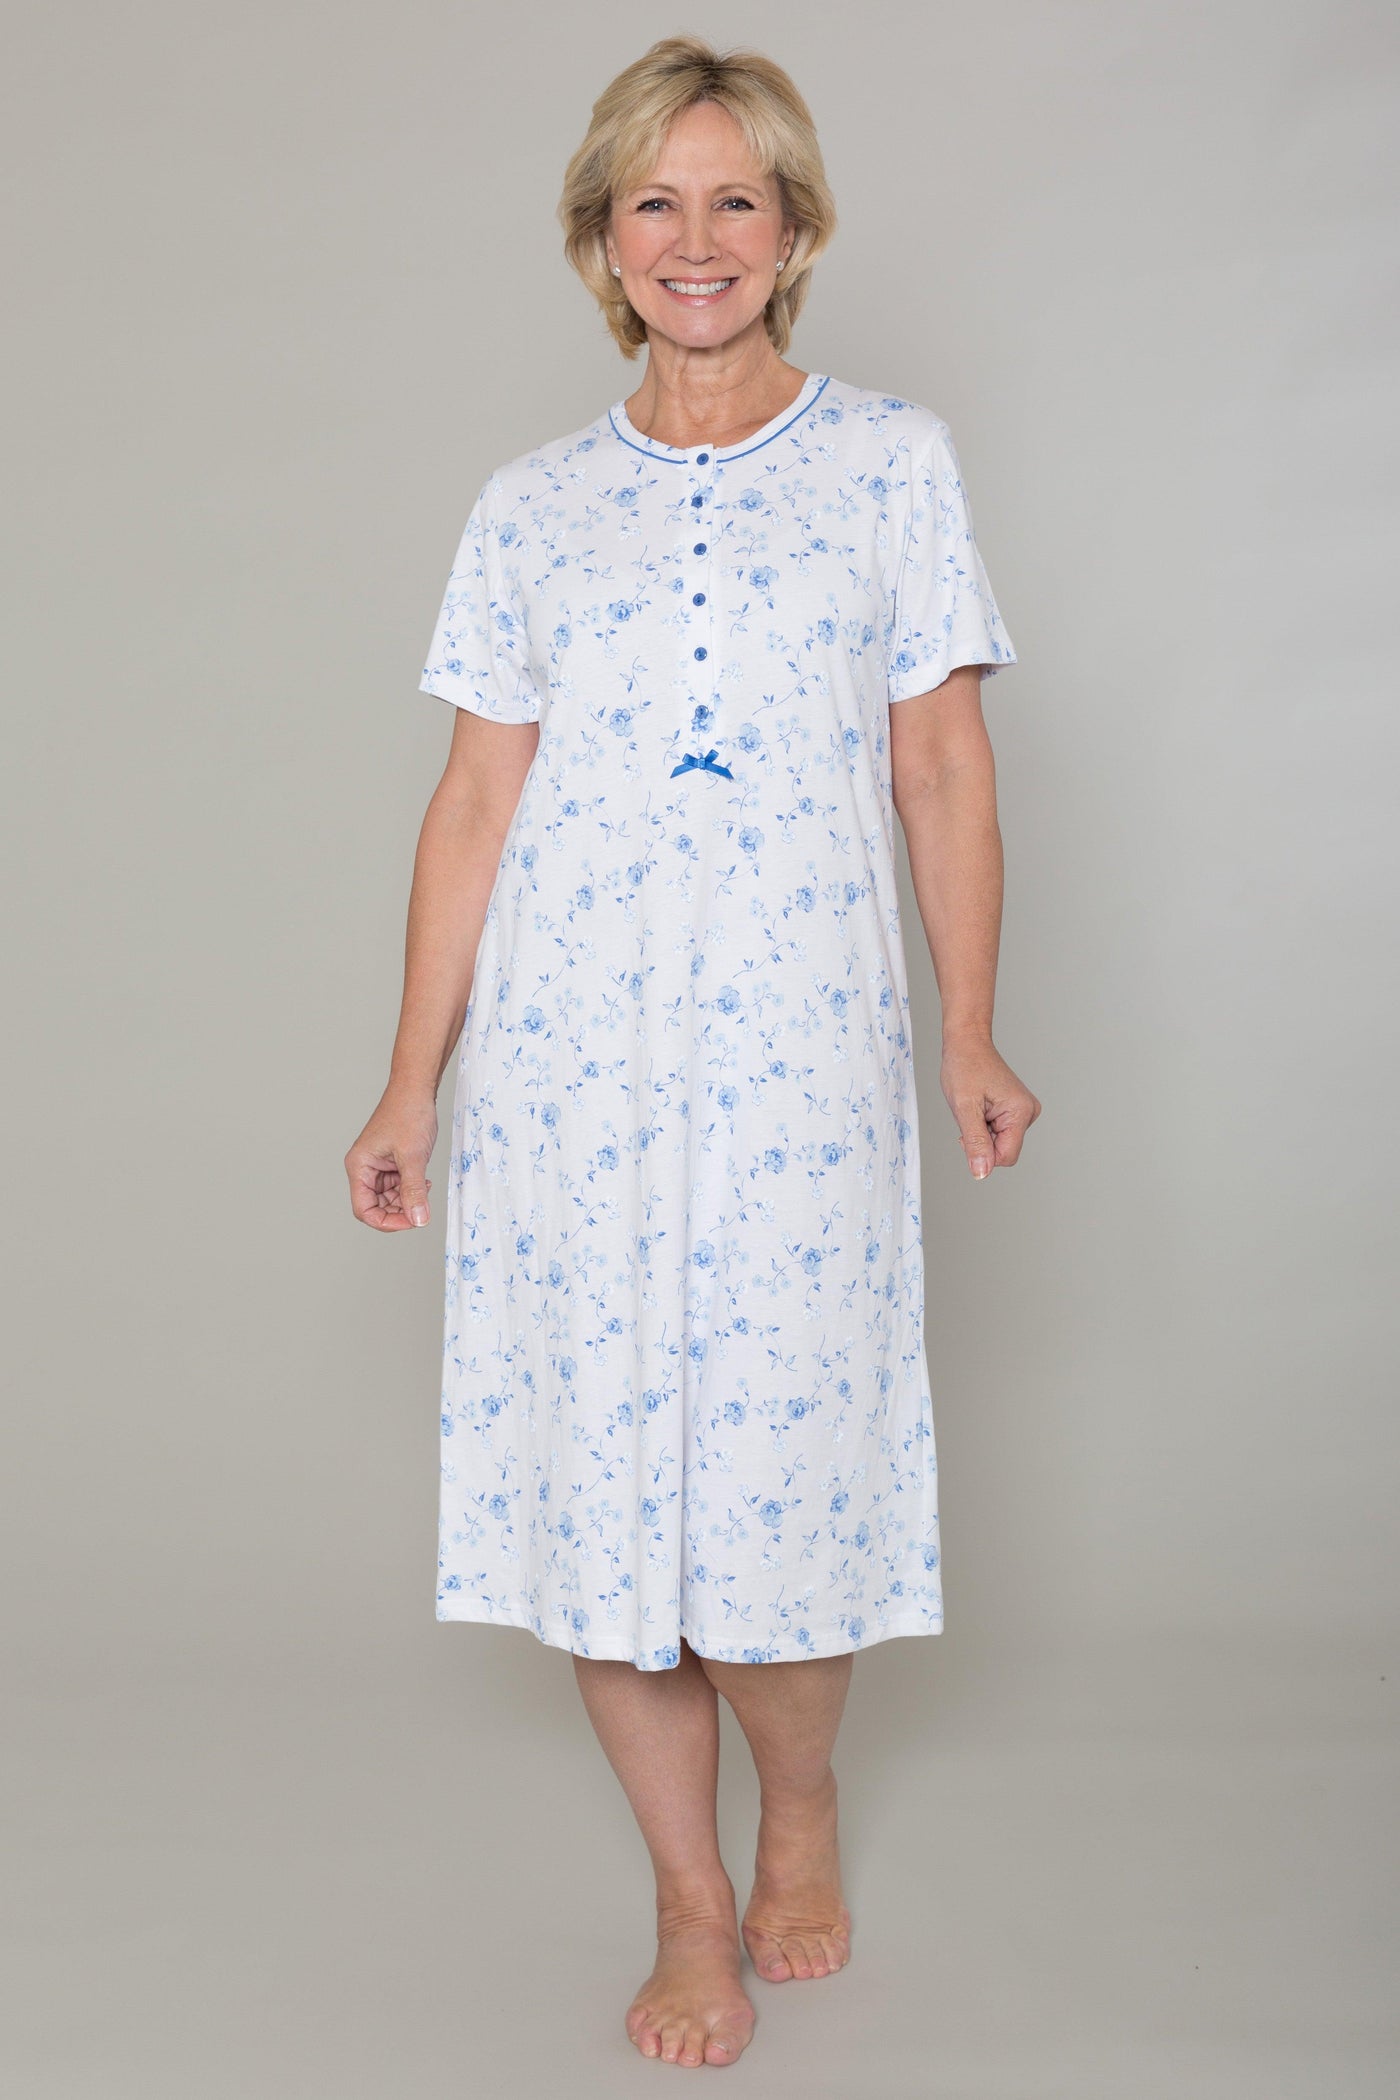 Bow Placket Nightdress - Carr & Westley